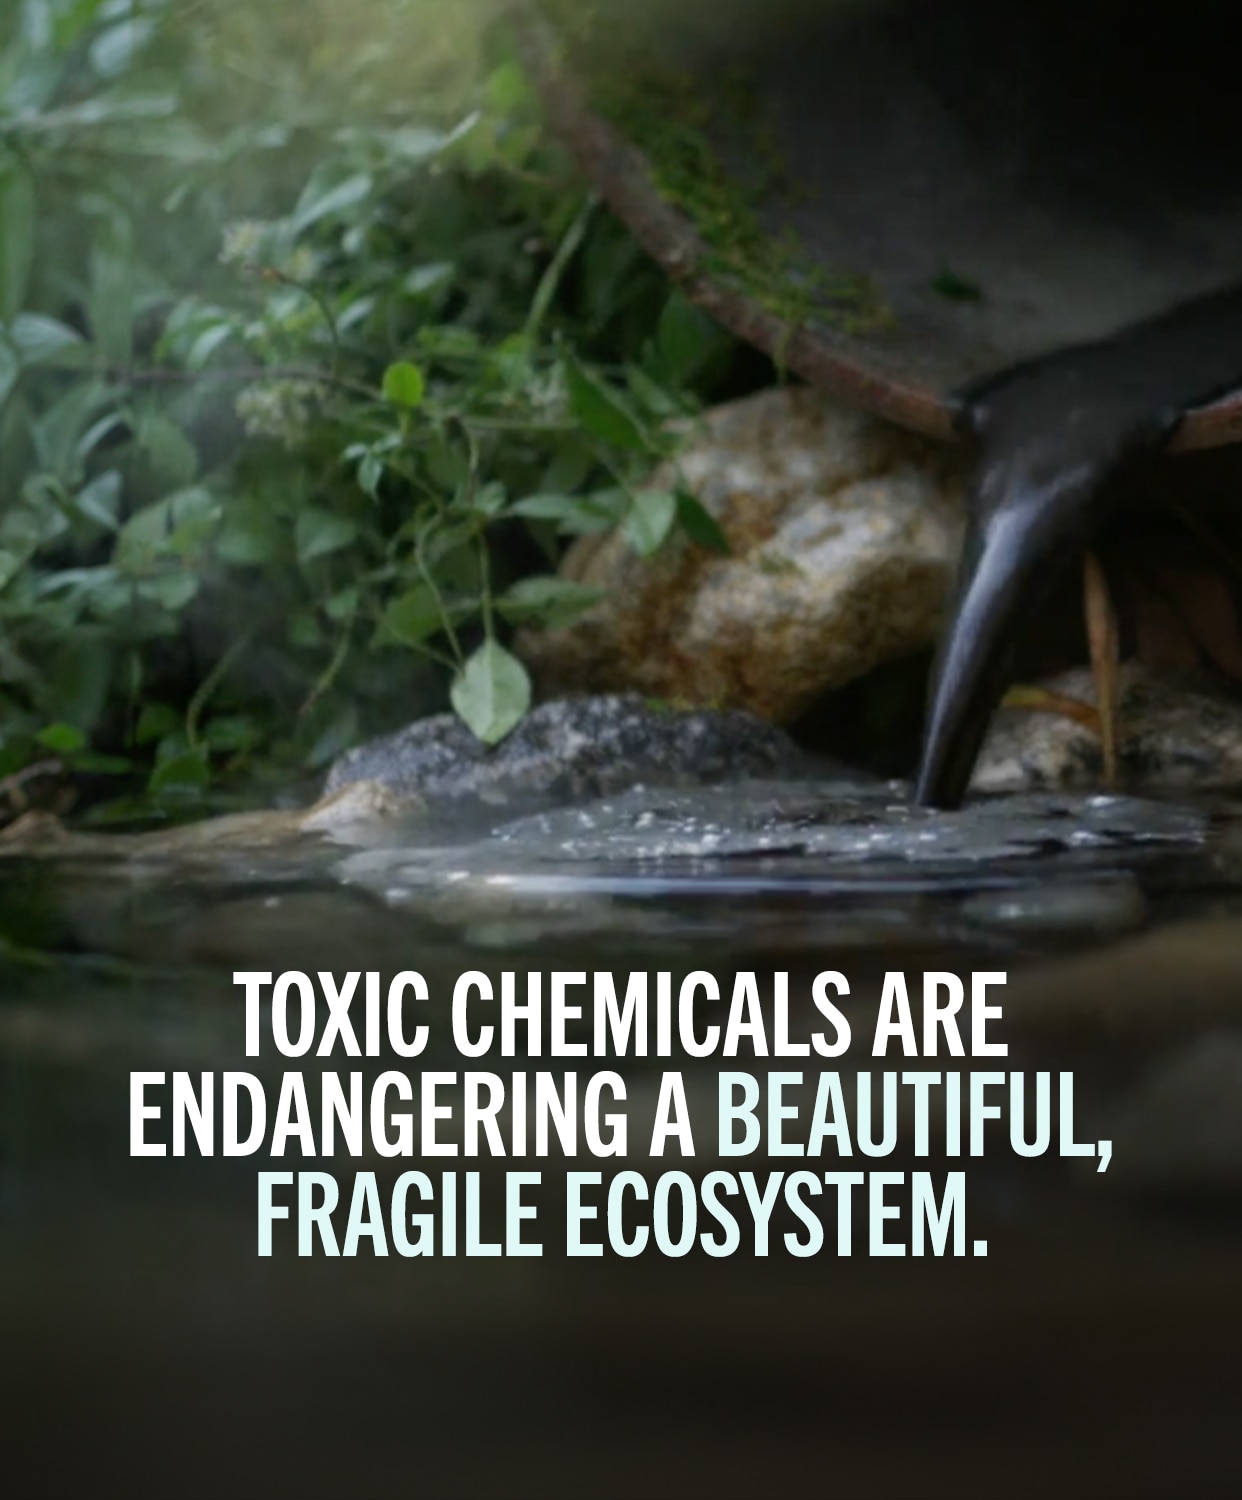 Toxic chemicals are endangering a beautiful, fragile ecosystem.